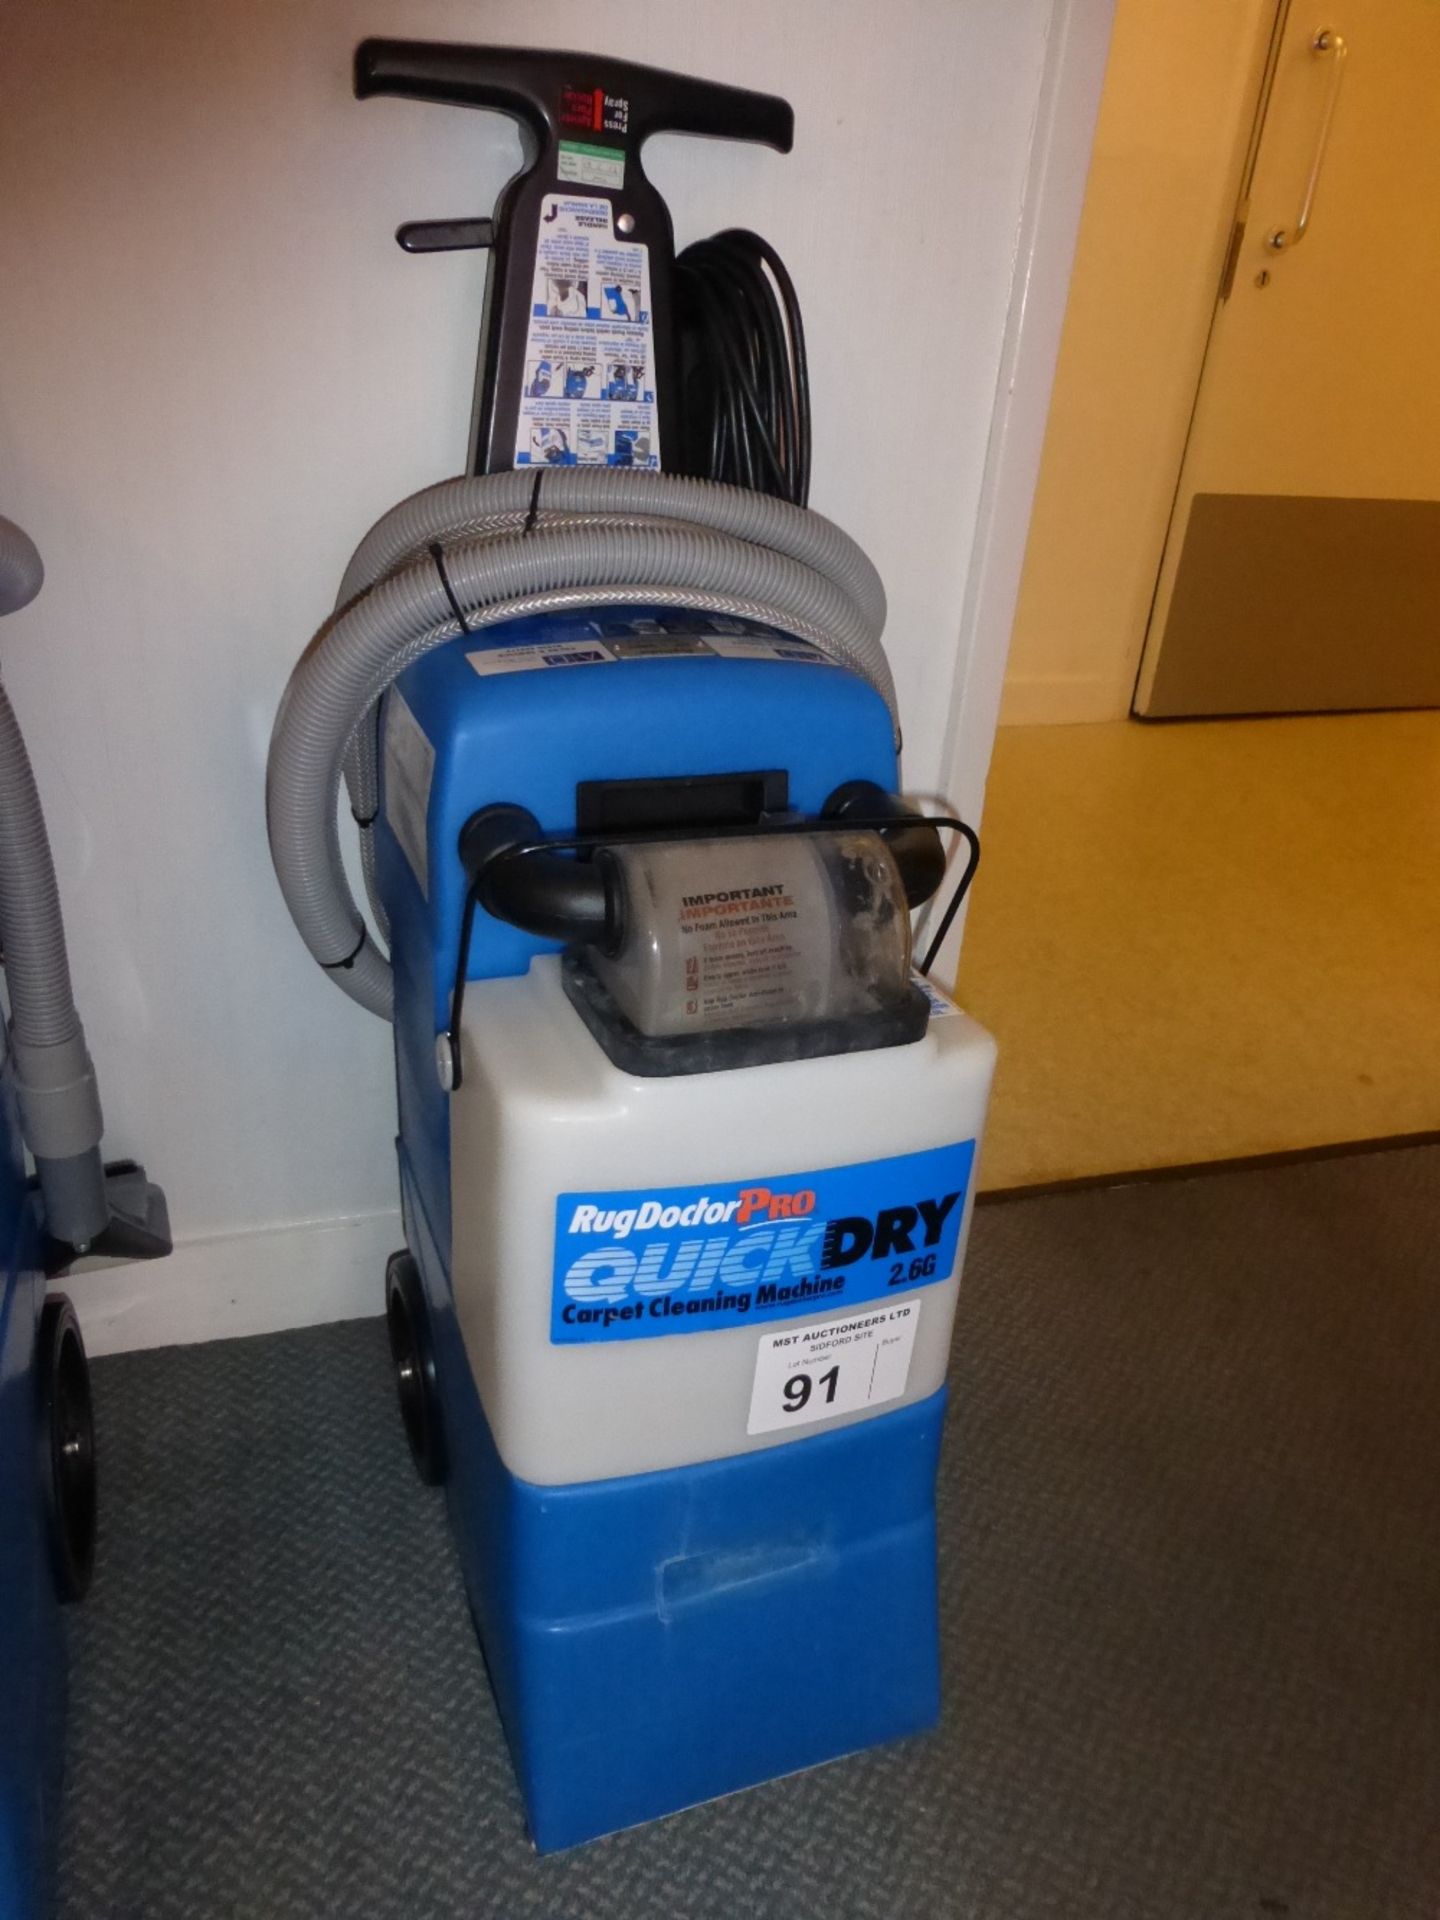 A RugDoctor Pro Quick Dry 2.6G carpet cleaning machine (located in room 31)